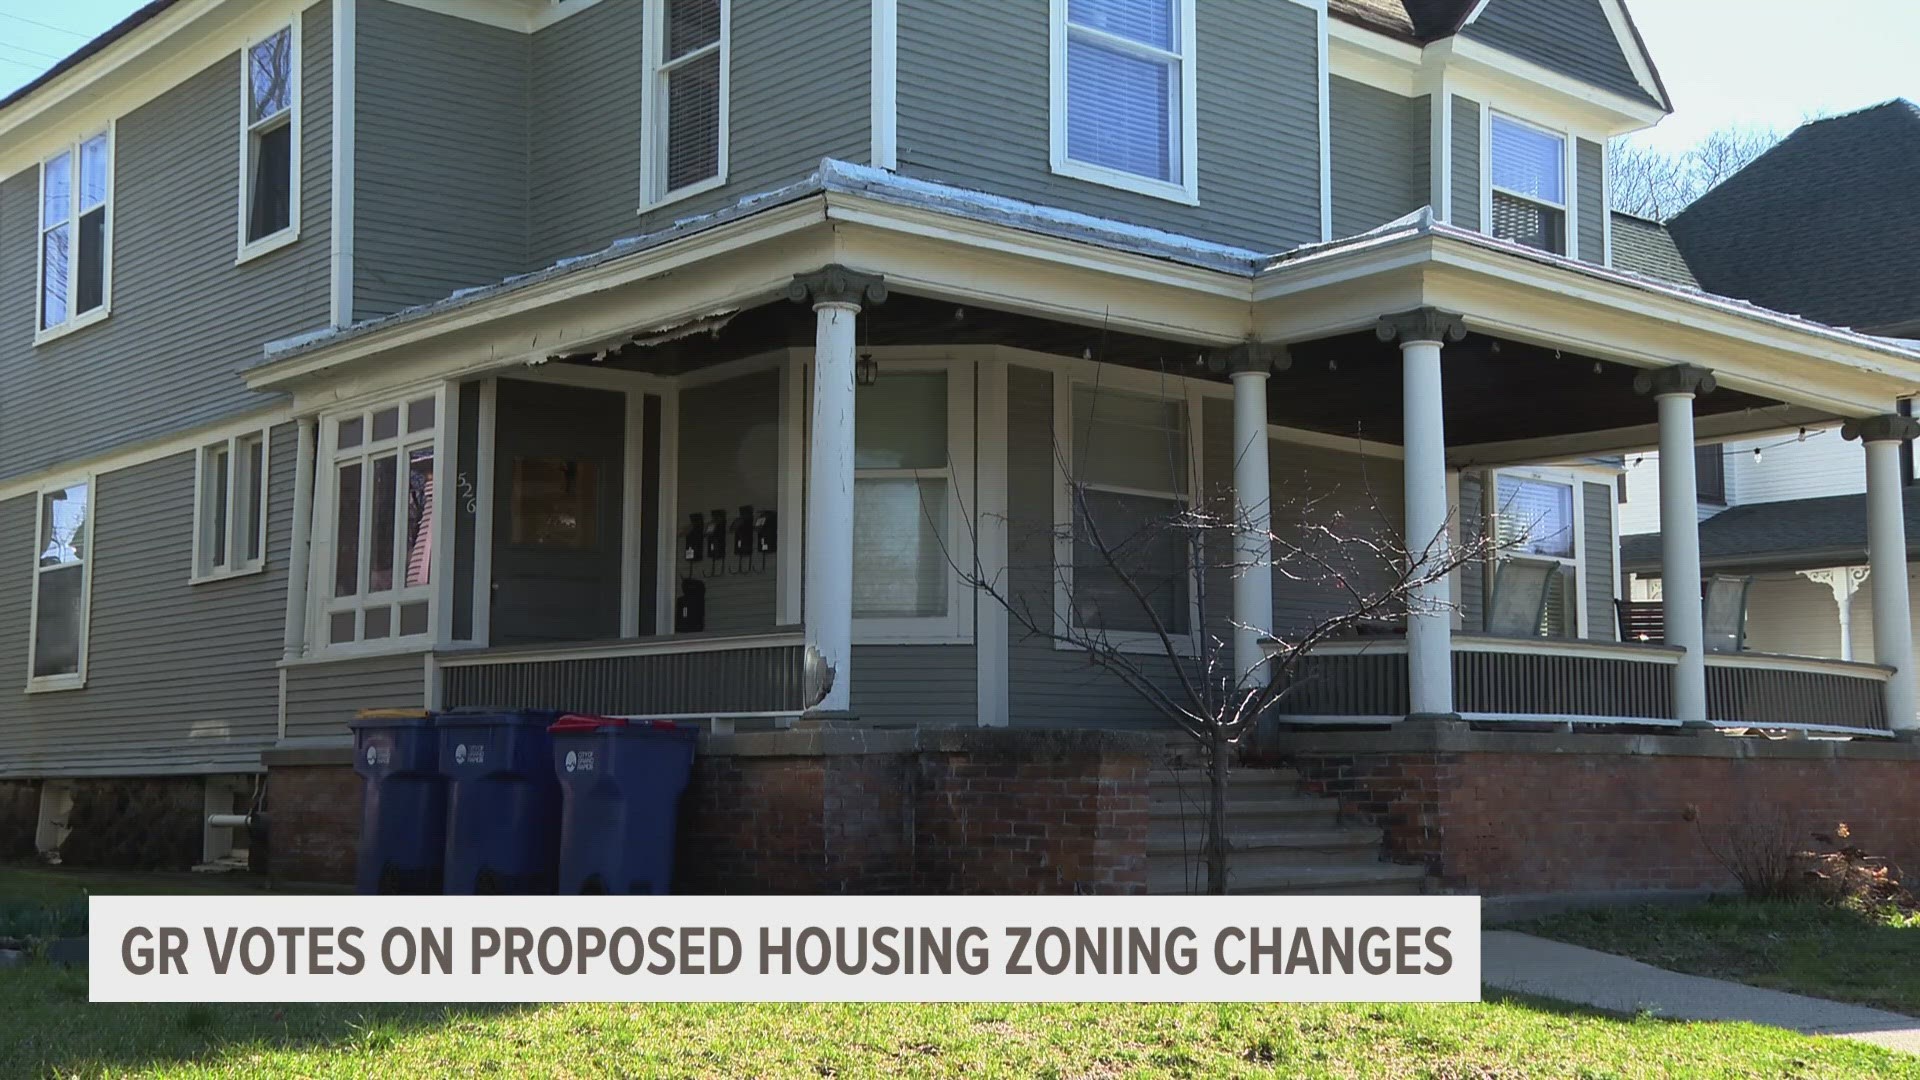 While Kent County is in a housing crisis, Grand Rapids is looking at changing some zoning to help.